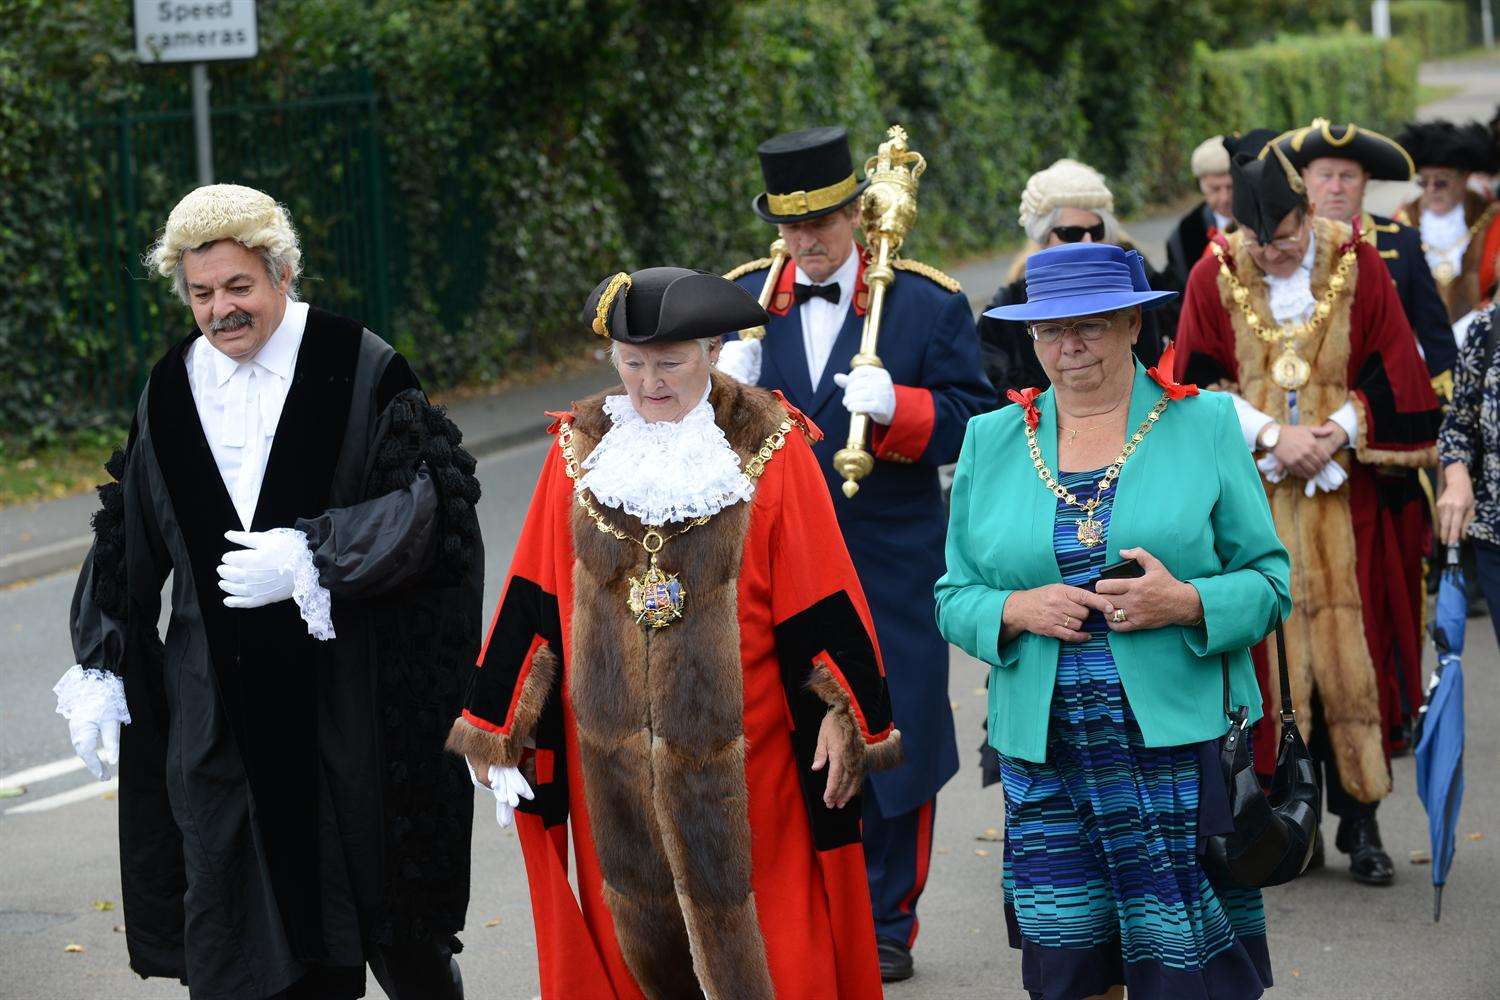 The Speaker's Day procession setting off from the Marsh Academy in New Romney.